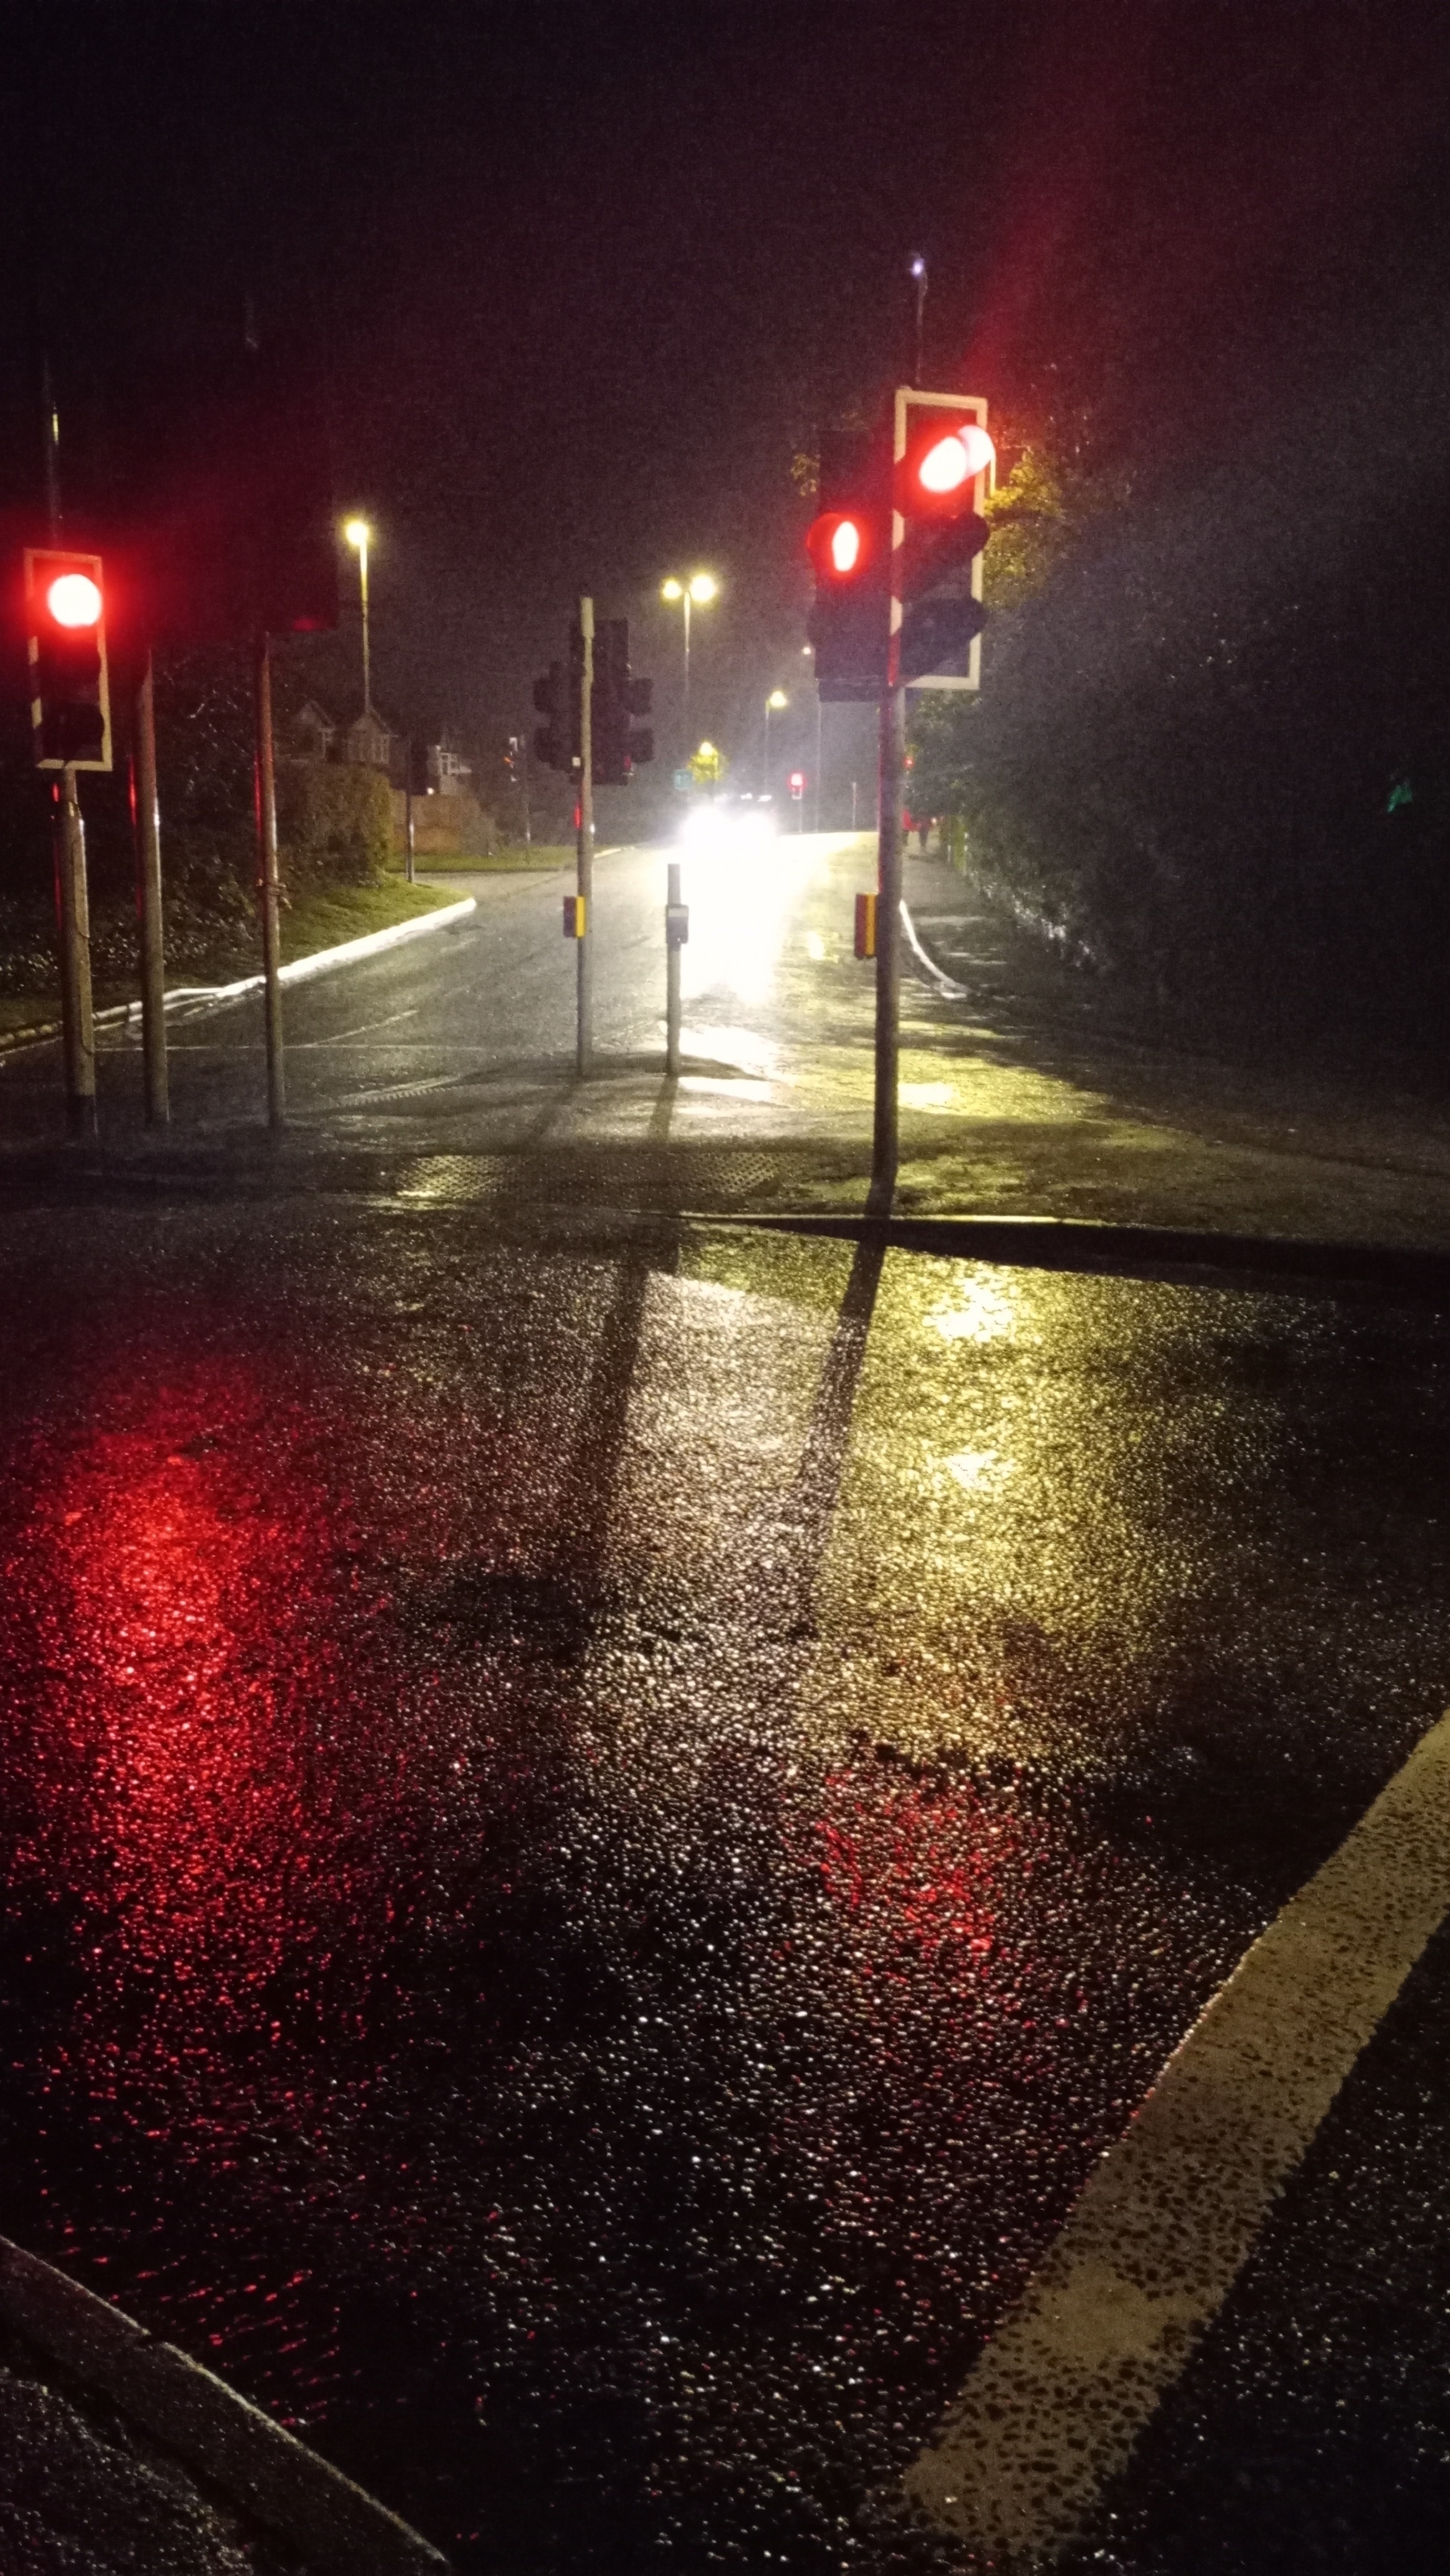 A rainy "Harnham gyratory" before any walkers came through